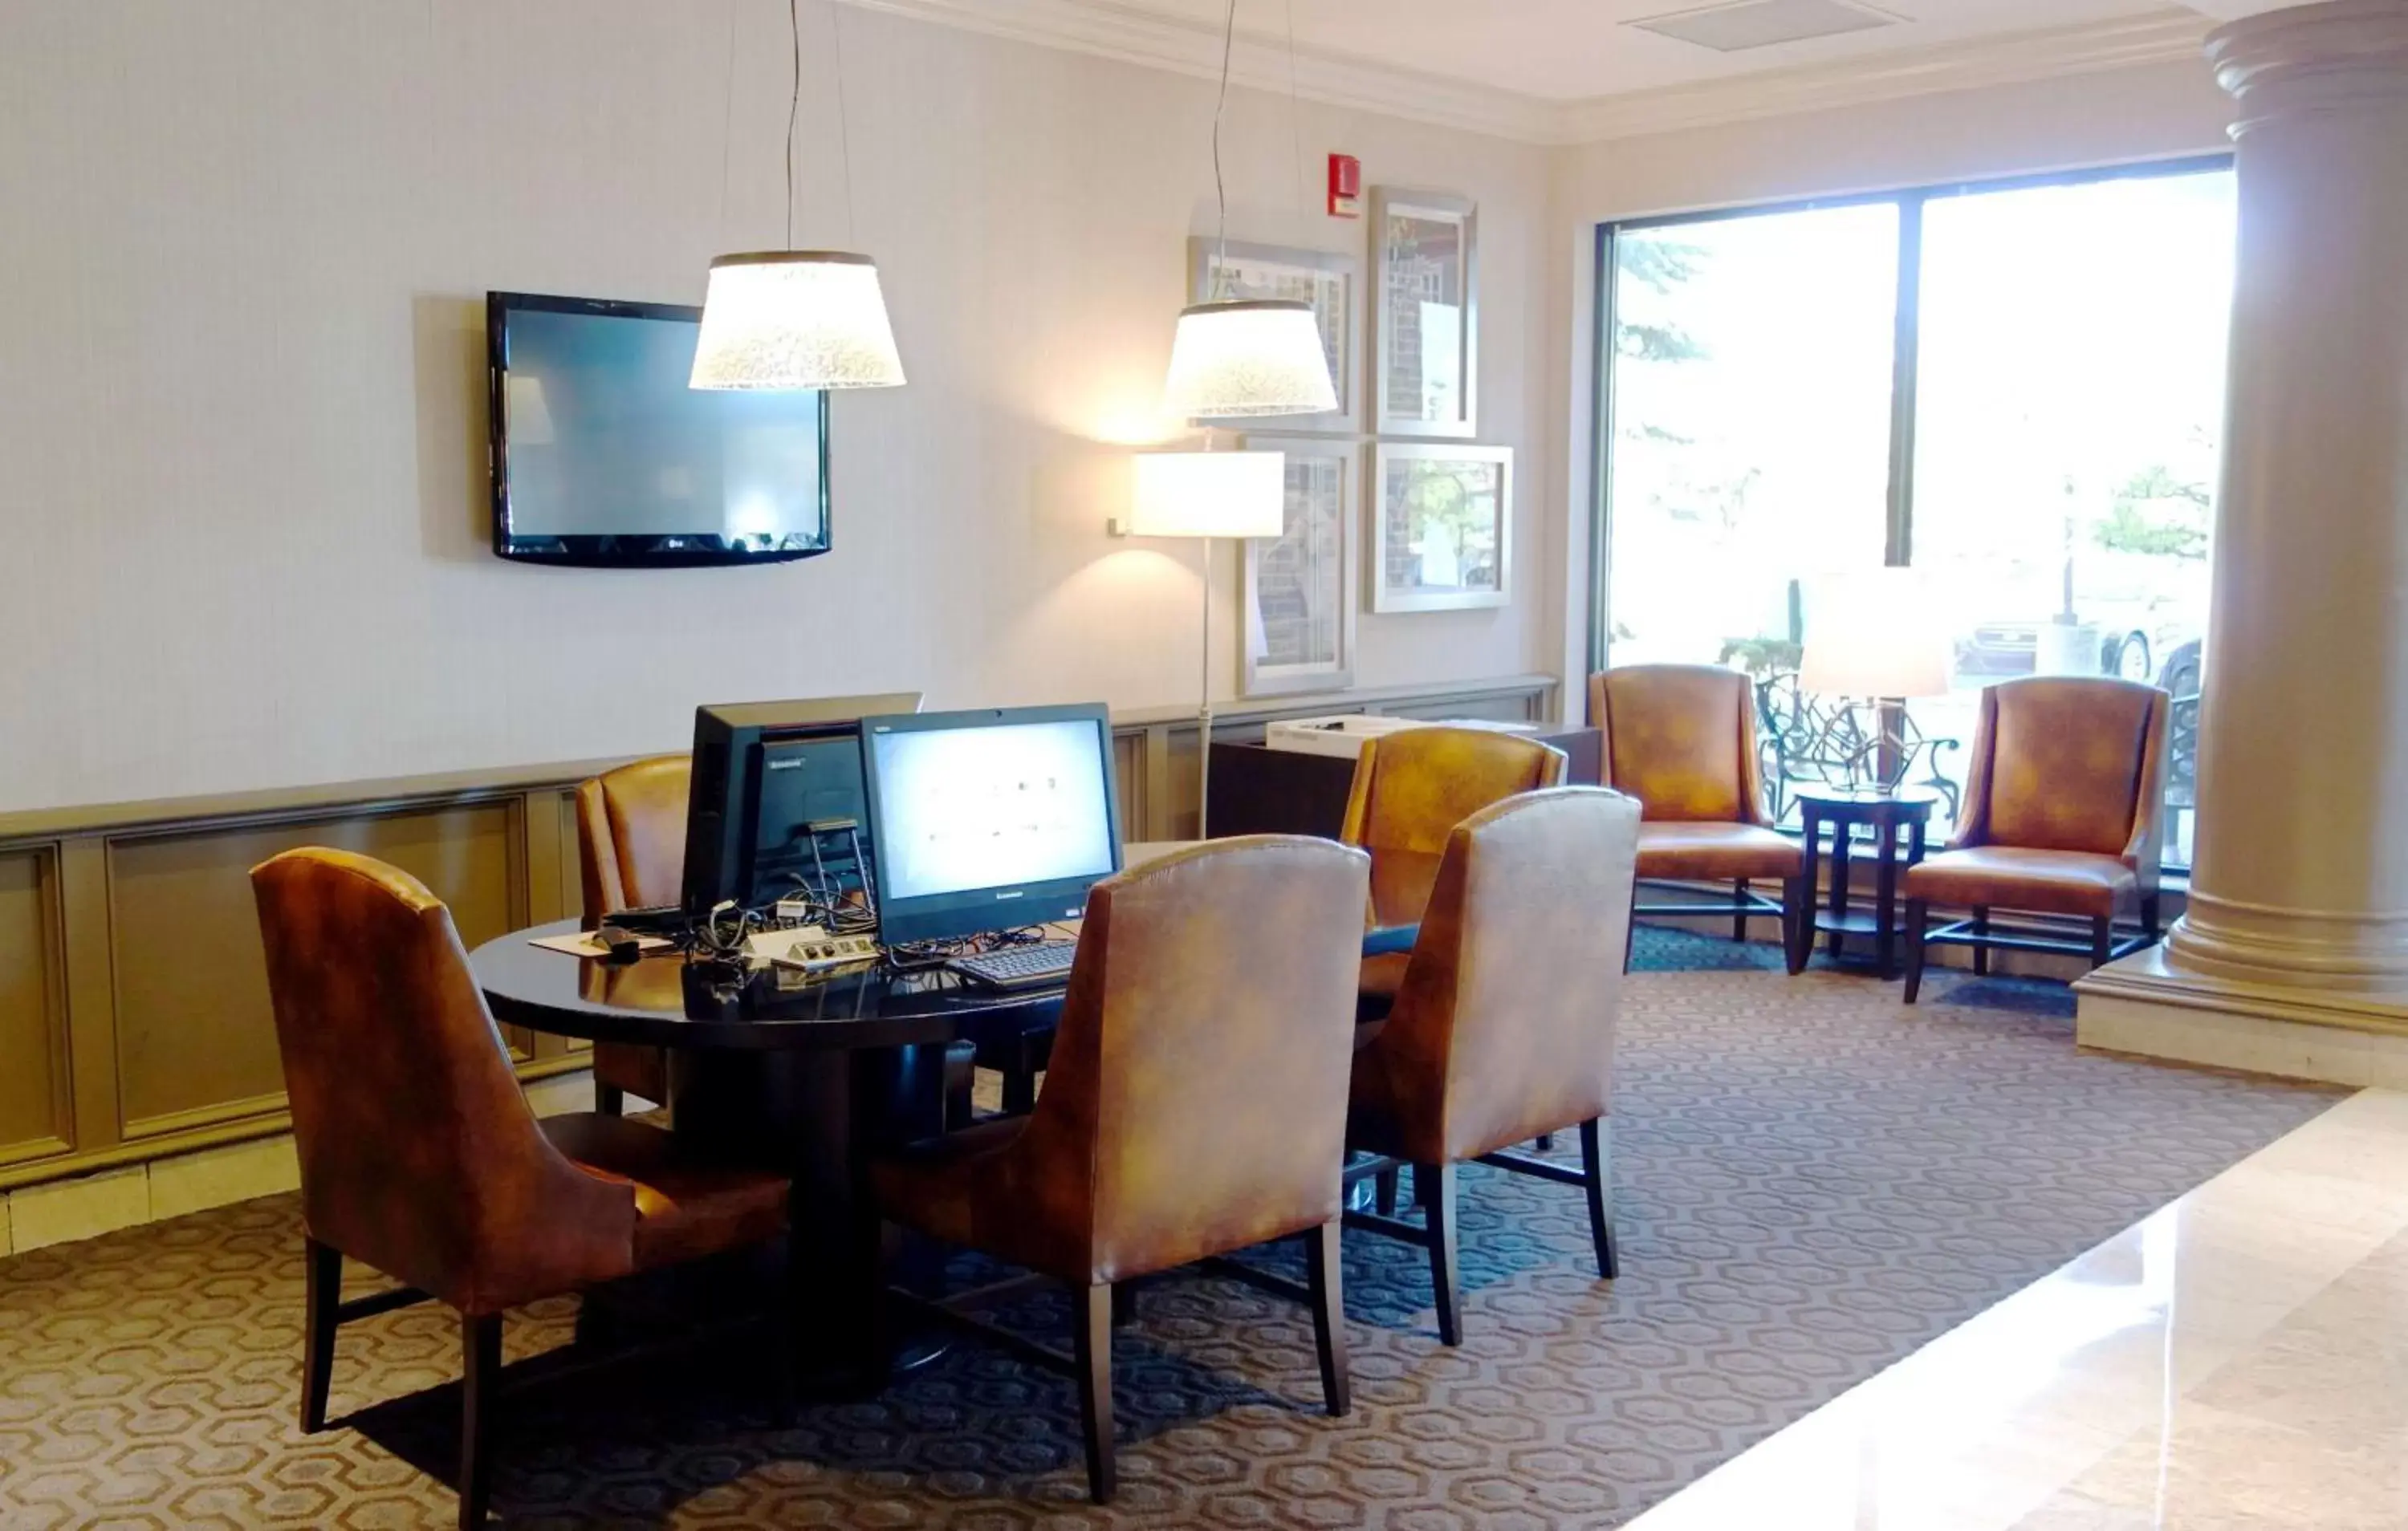 Business facilities in Doubletree by Hilton, Leominster